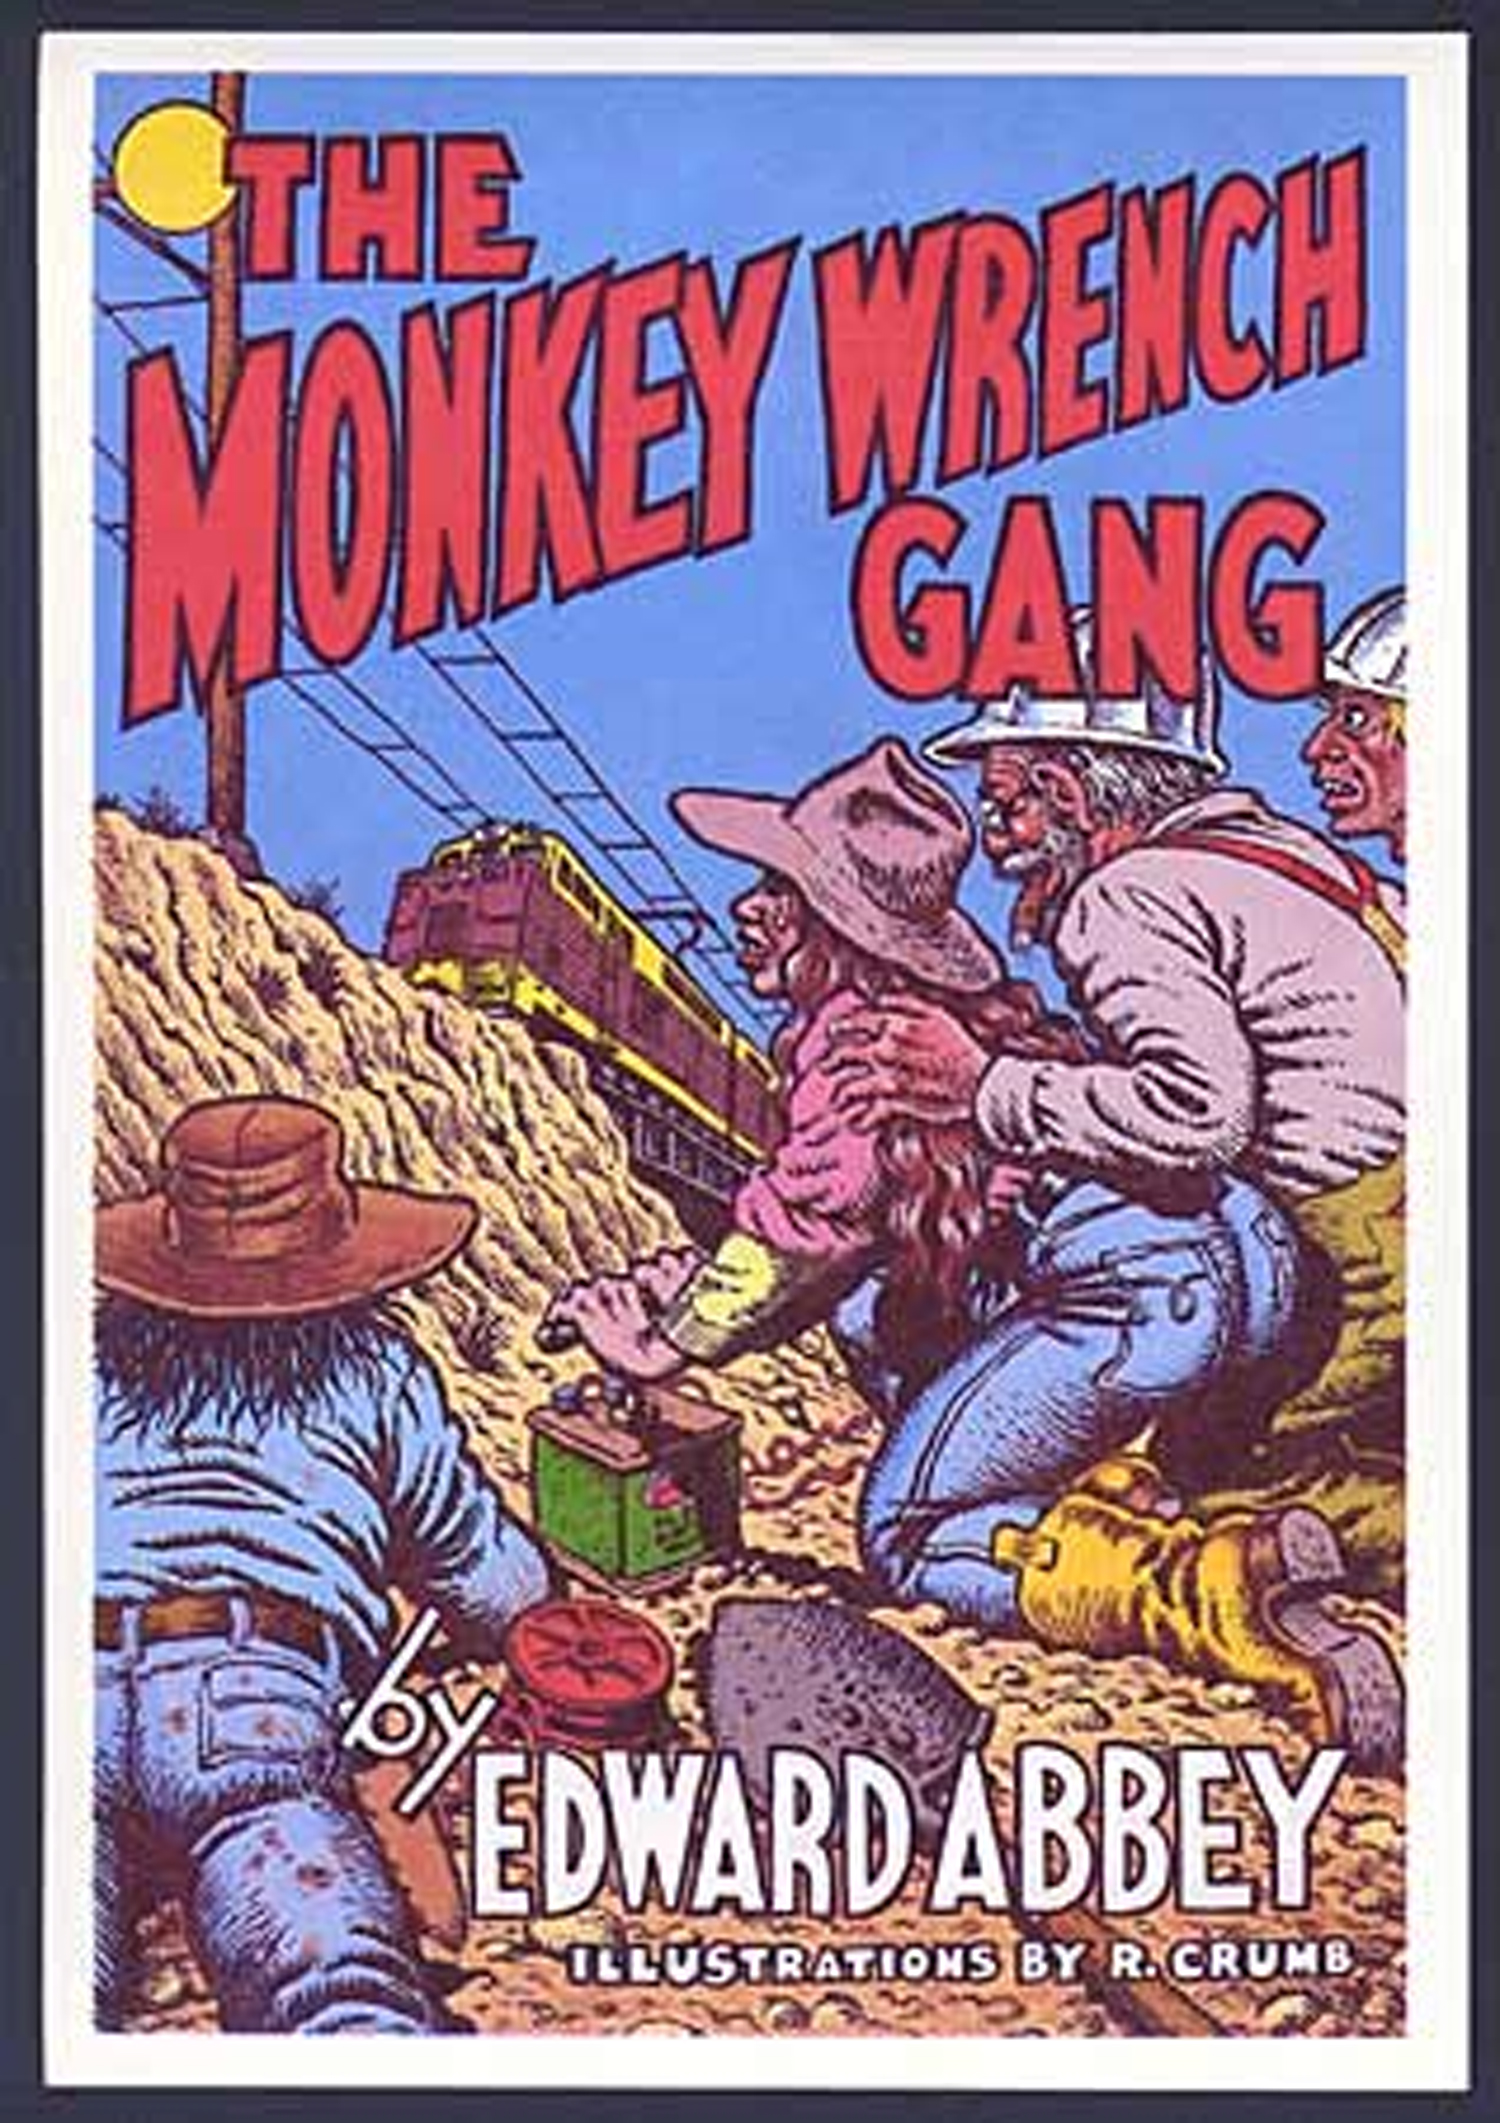 R. Crumb Meets the Monkey Wrench Gang: Edward Abbey and the Modern Environmental Movement from Earth First!